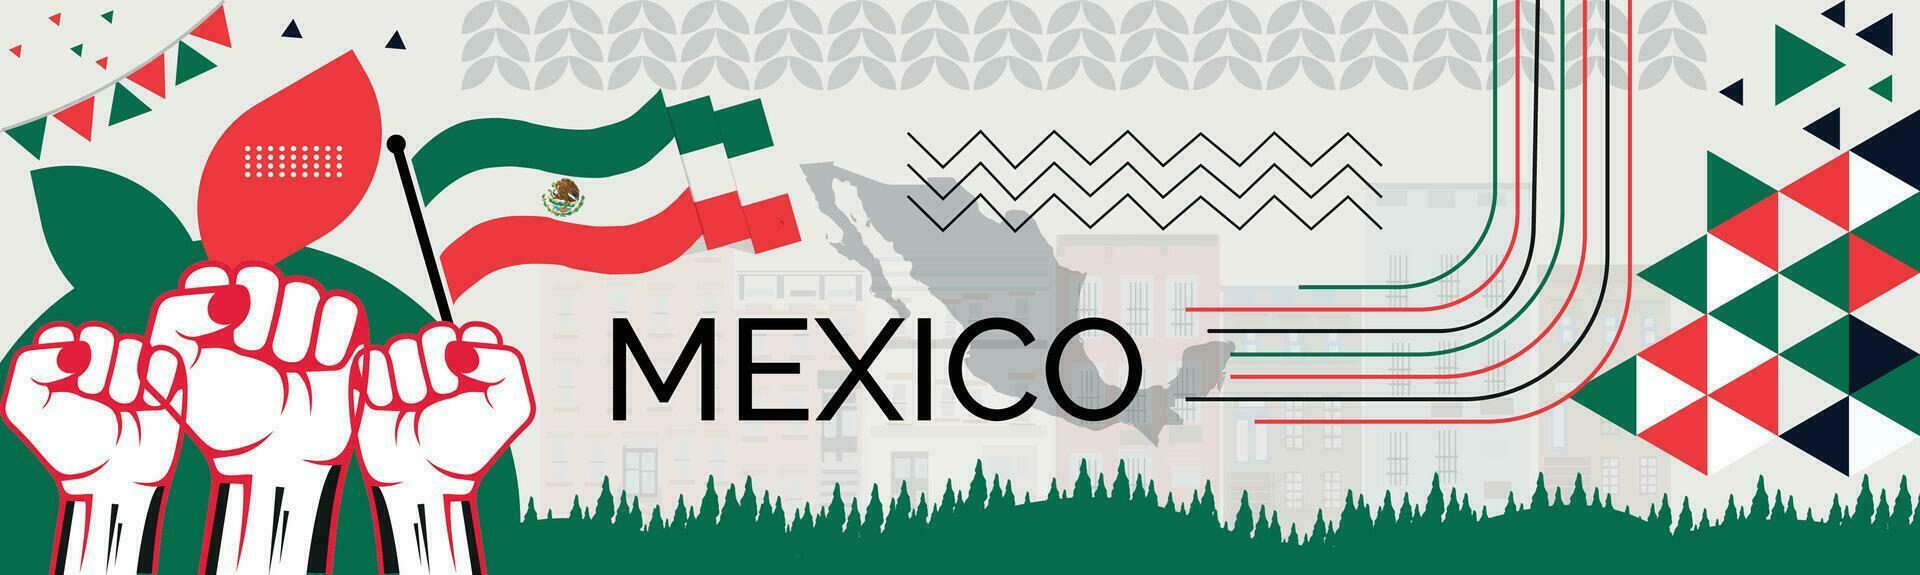 MEXICO Map and raised fists. National day or Independence day design for MEXICO celebration. Modern retro design with abstract icons. Vector illustration.